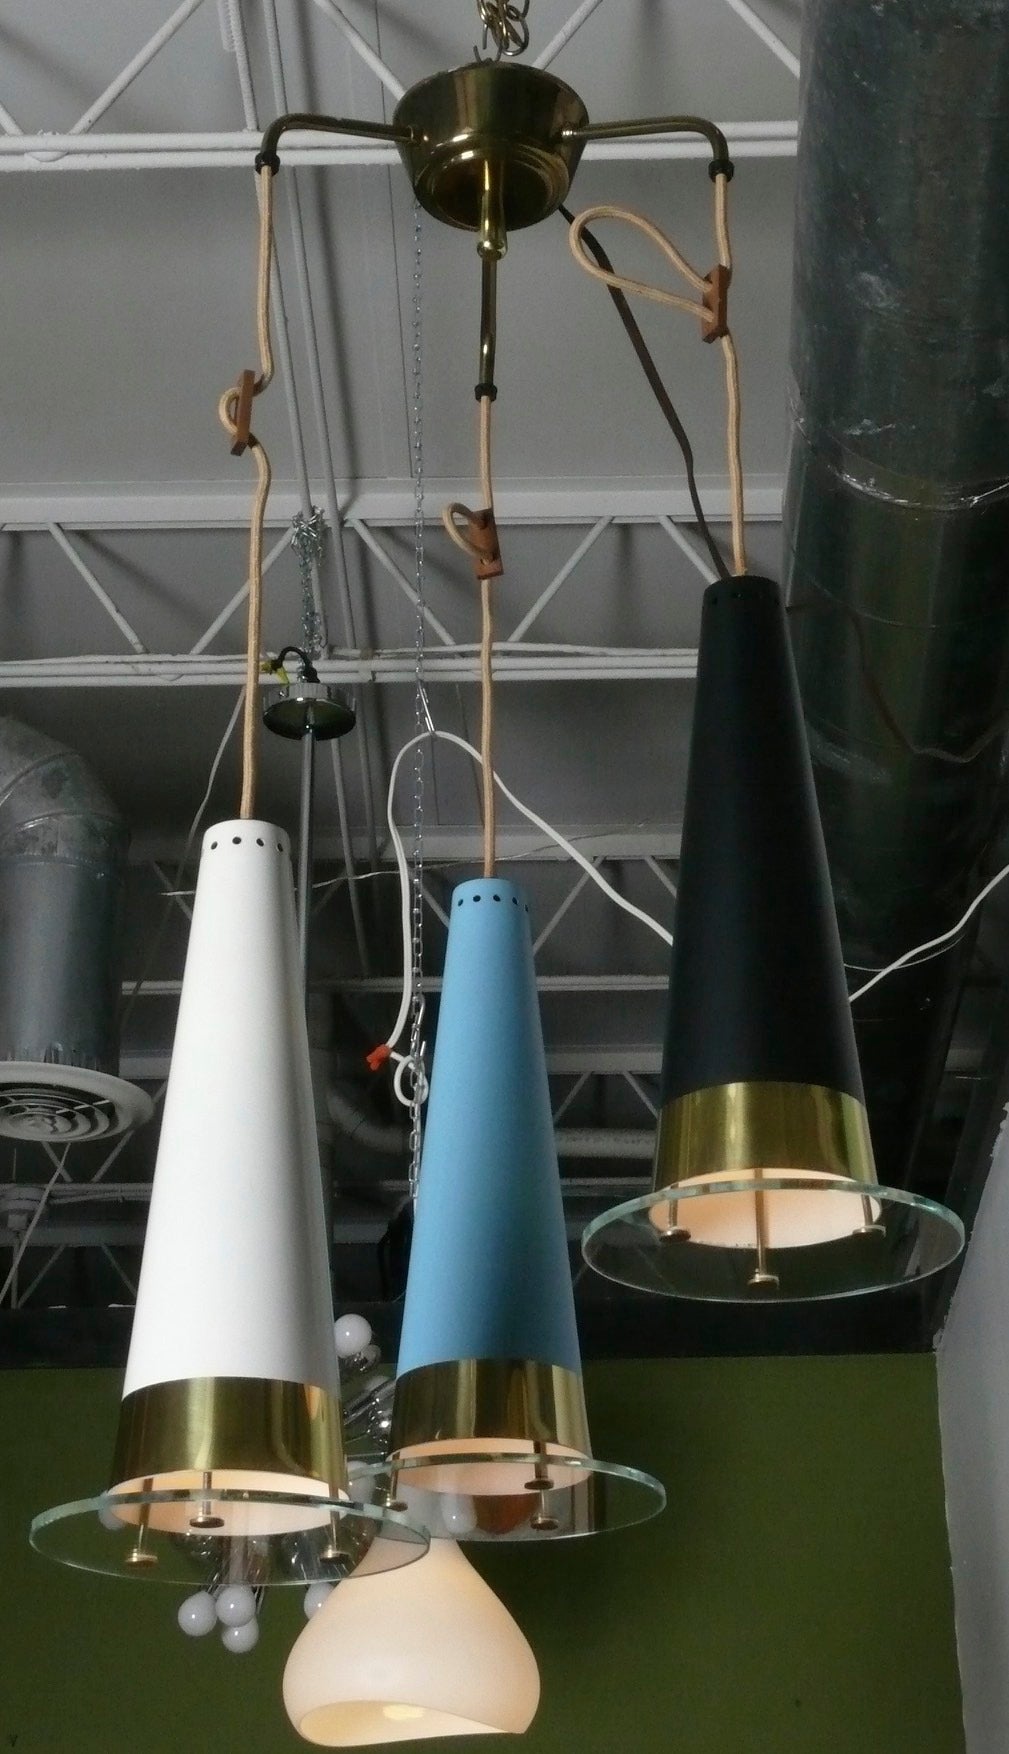 Late 50s 3 pendant adjustable height fixture with enameled metal & brass cones that support glass discs. It has a 35